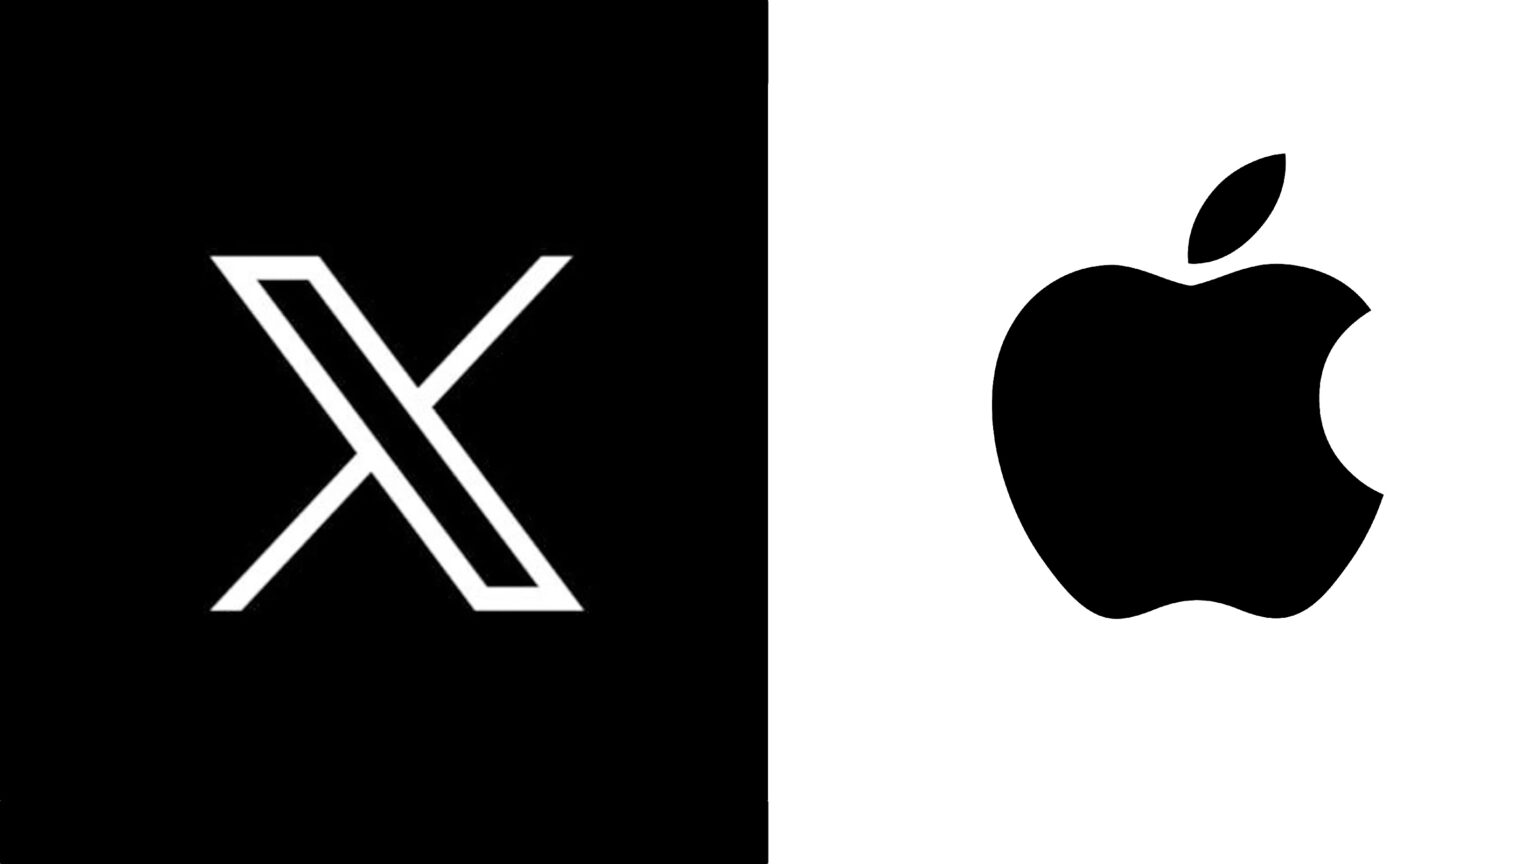 X and Apple logos